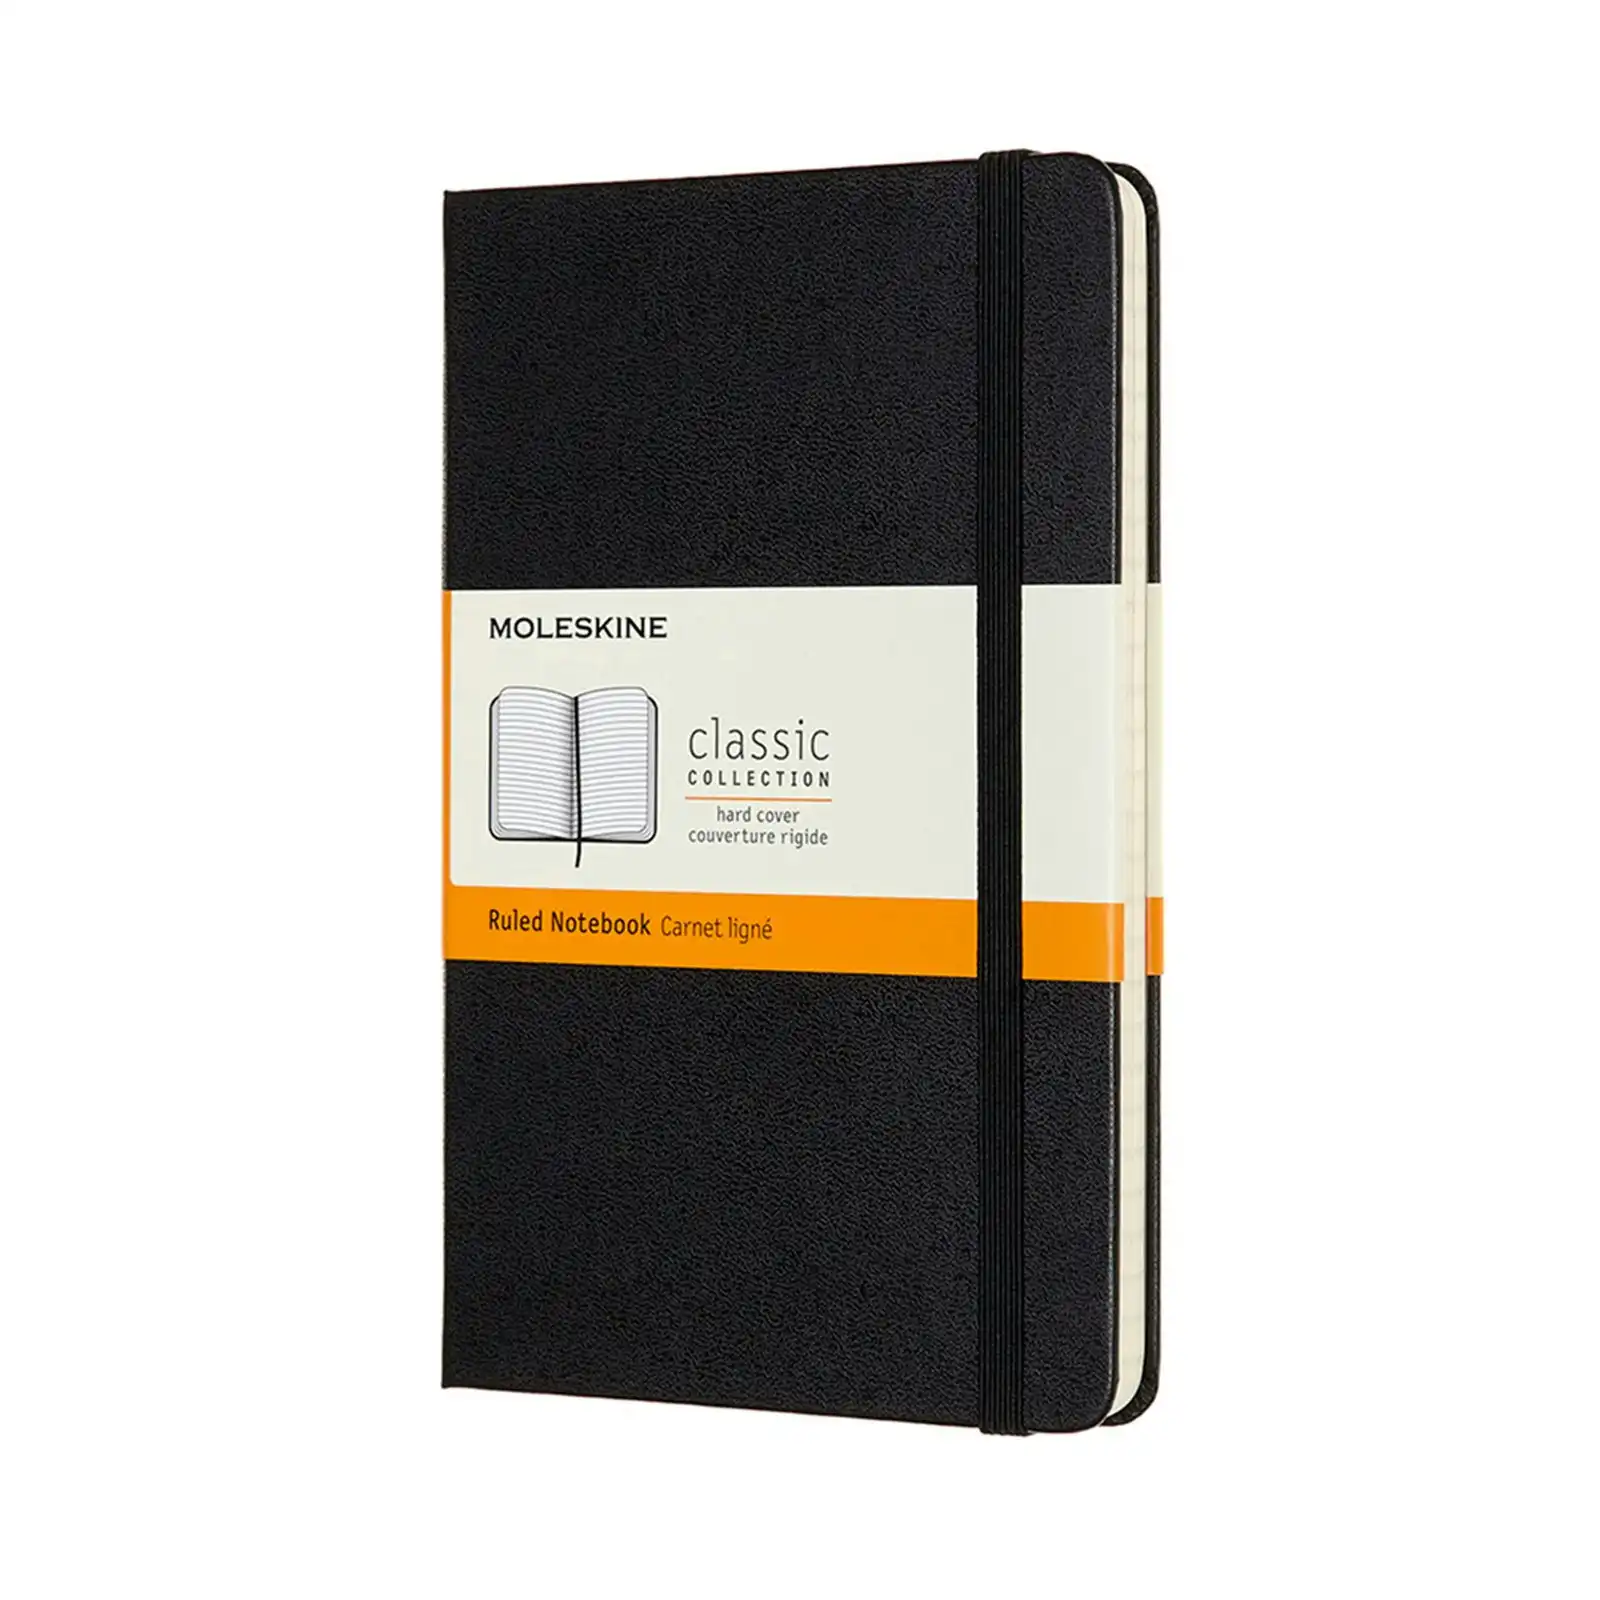 Moleskine Classic Hard Cover Ruled Notebook M Office/Student Planner Notepad BLK